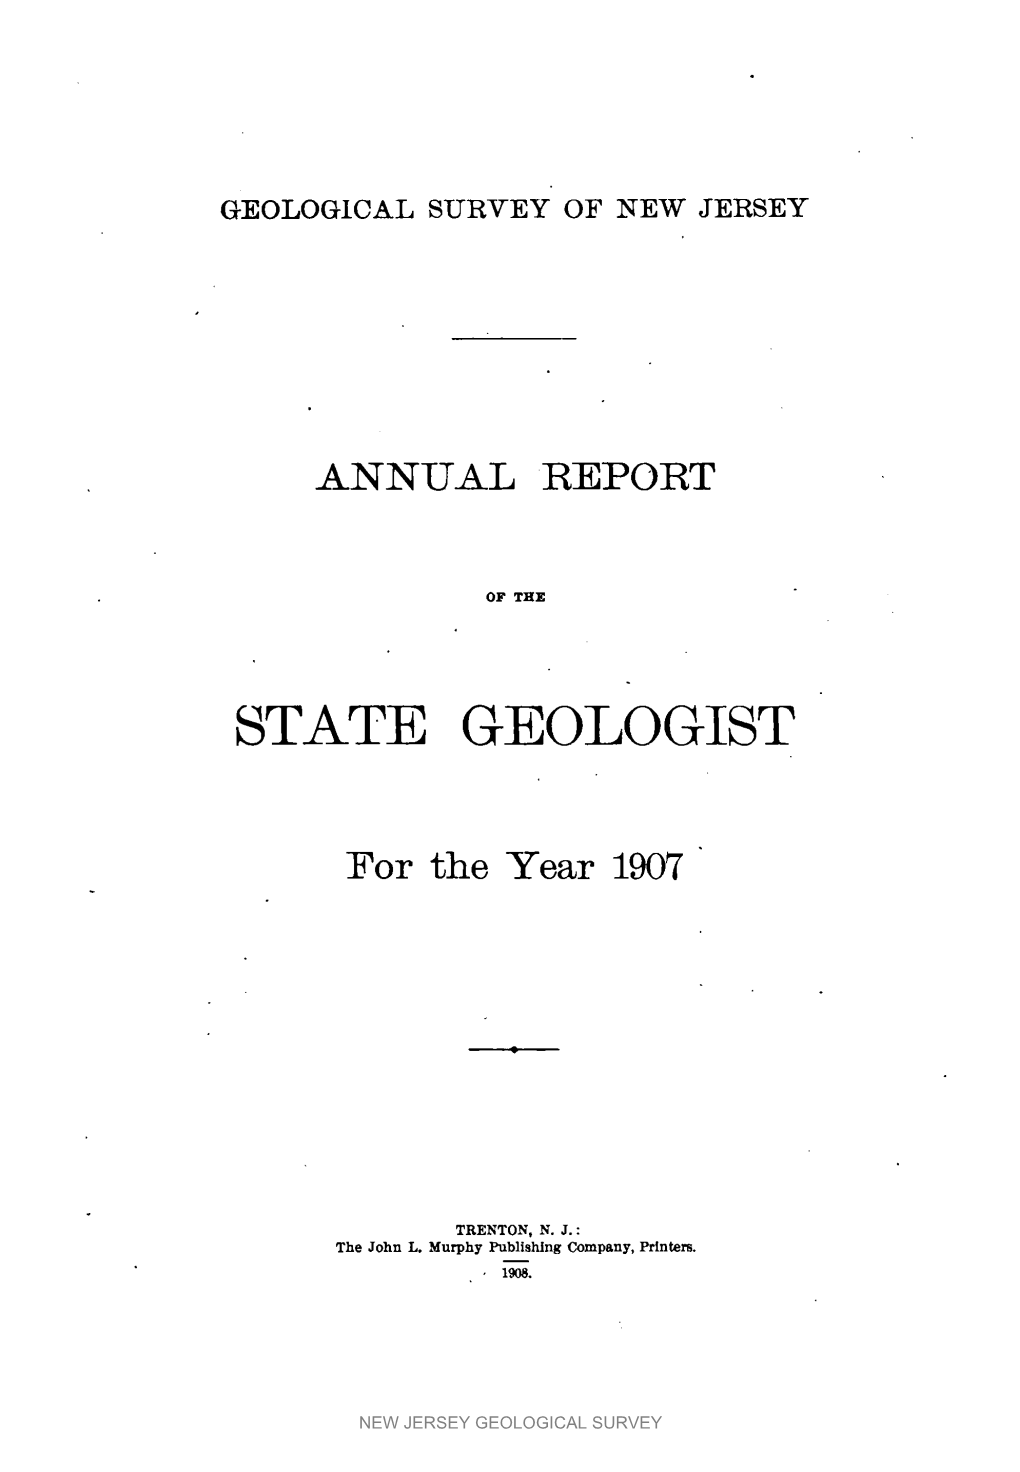 Annual Report of the State Geologist for the Year 1907